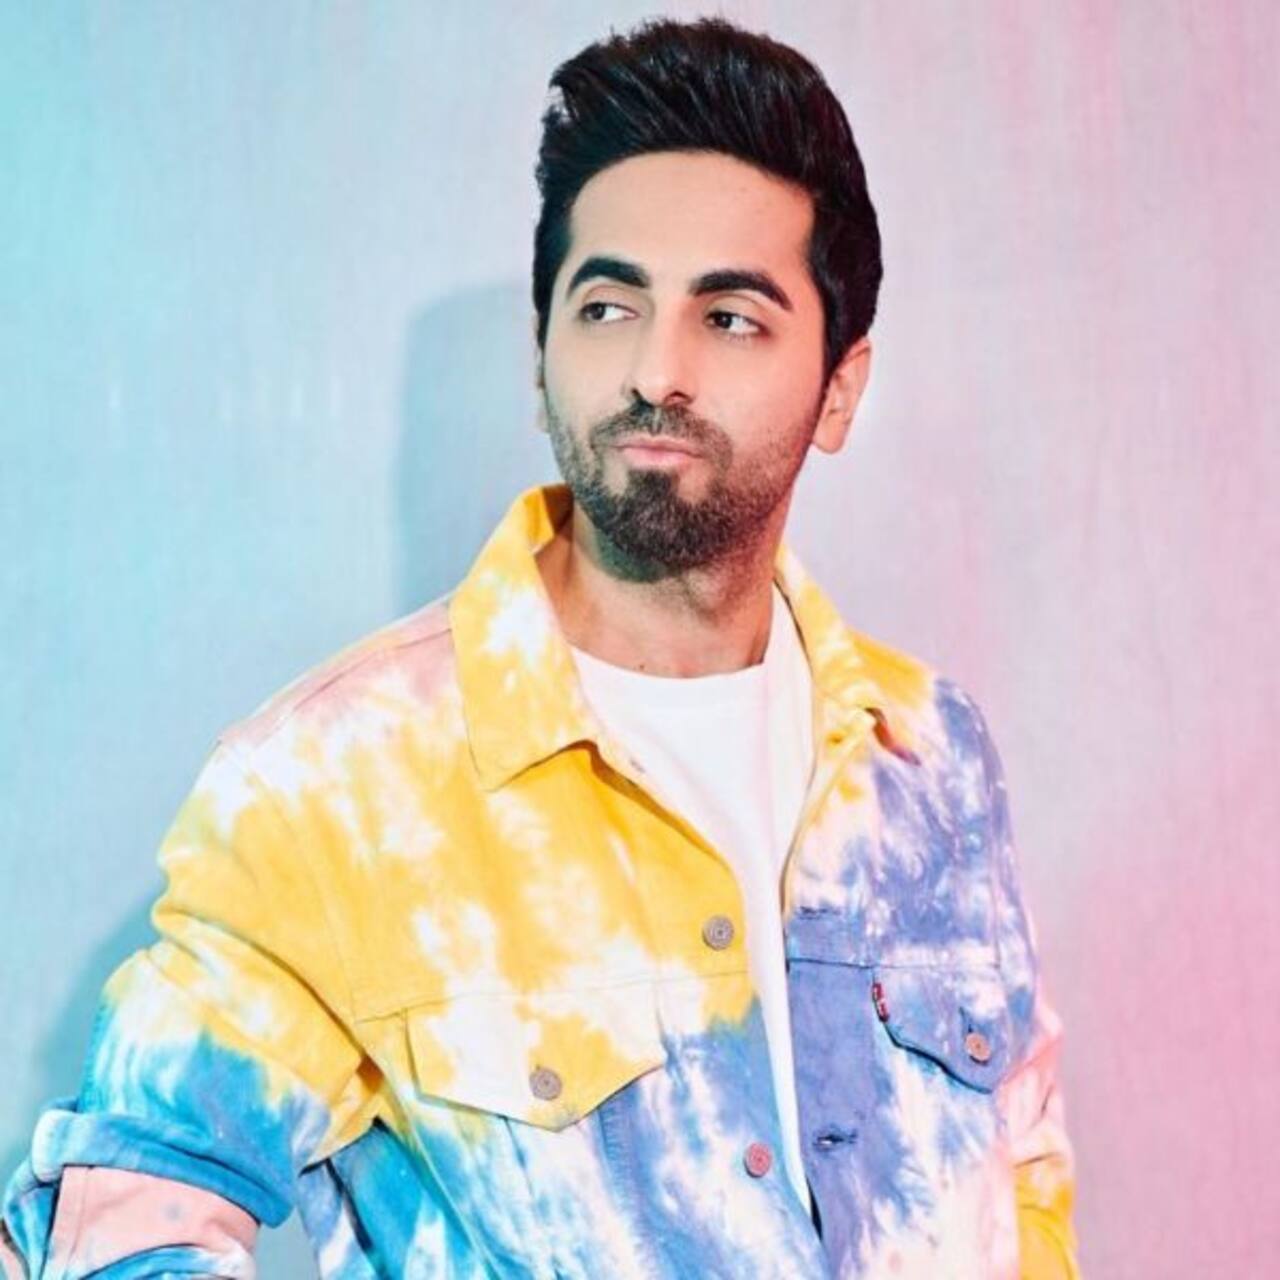 Ayushmann Khurrana on Shubh Mangal Zyada Saavdhan: Blessed to be acting at a time when I can root for social causes